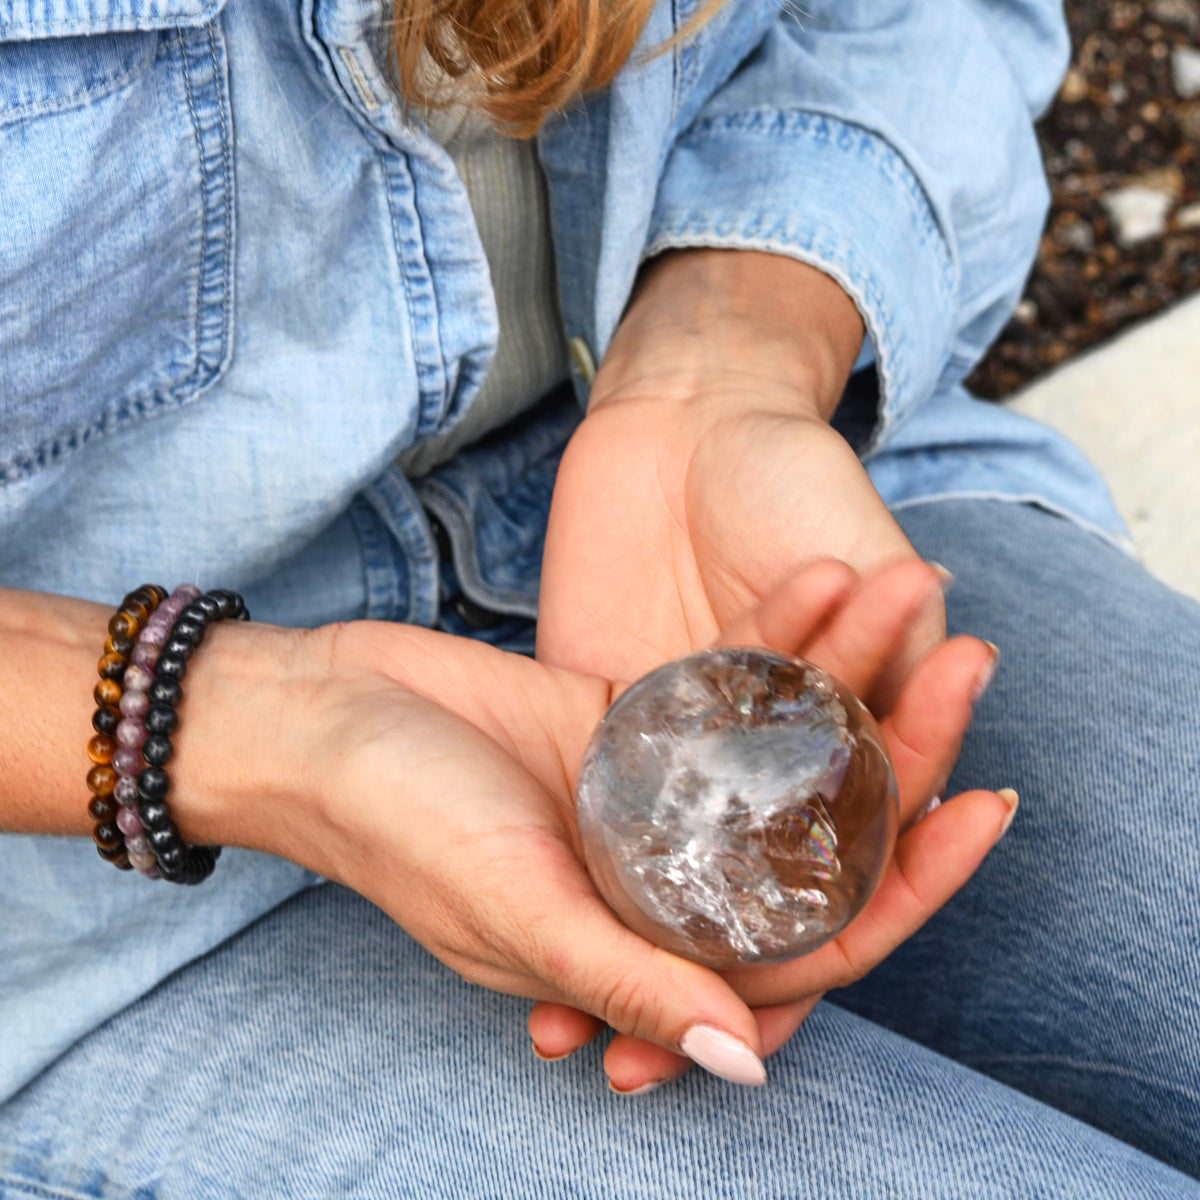 Clear Quartz Crystal: Meaning, Benefits & Healing Properties